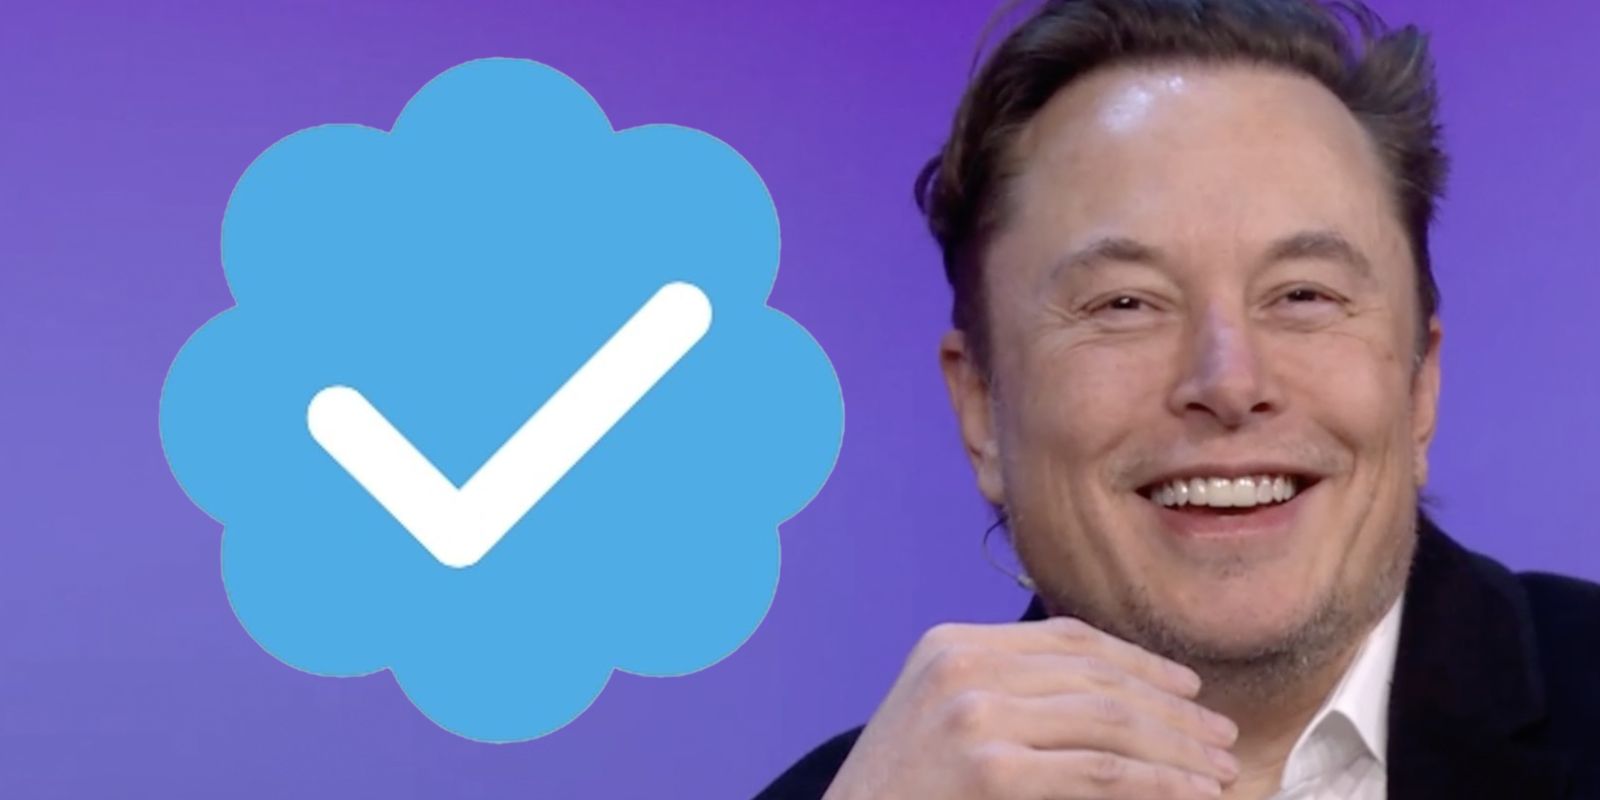 BREAKING: Elon Musk says he's about to publish files of Twitter's free speech suppression